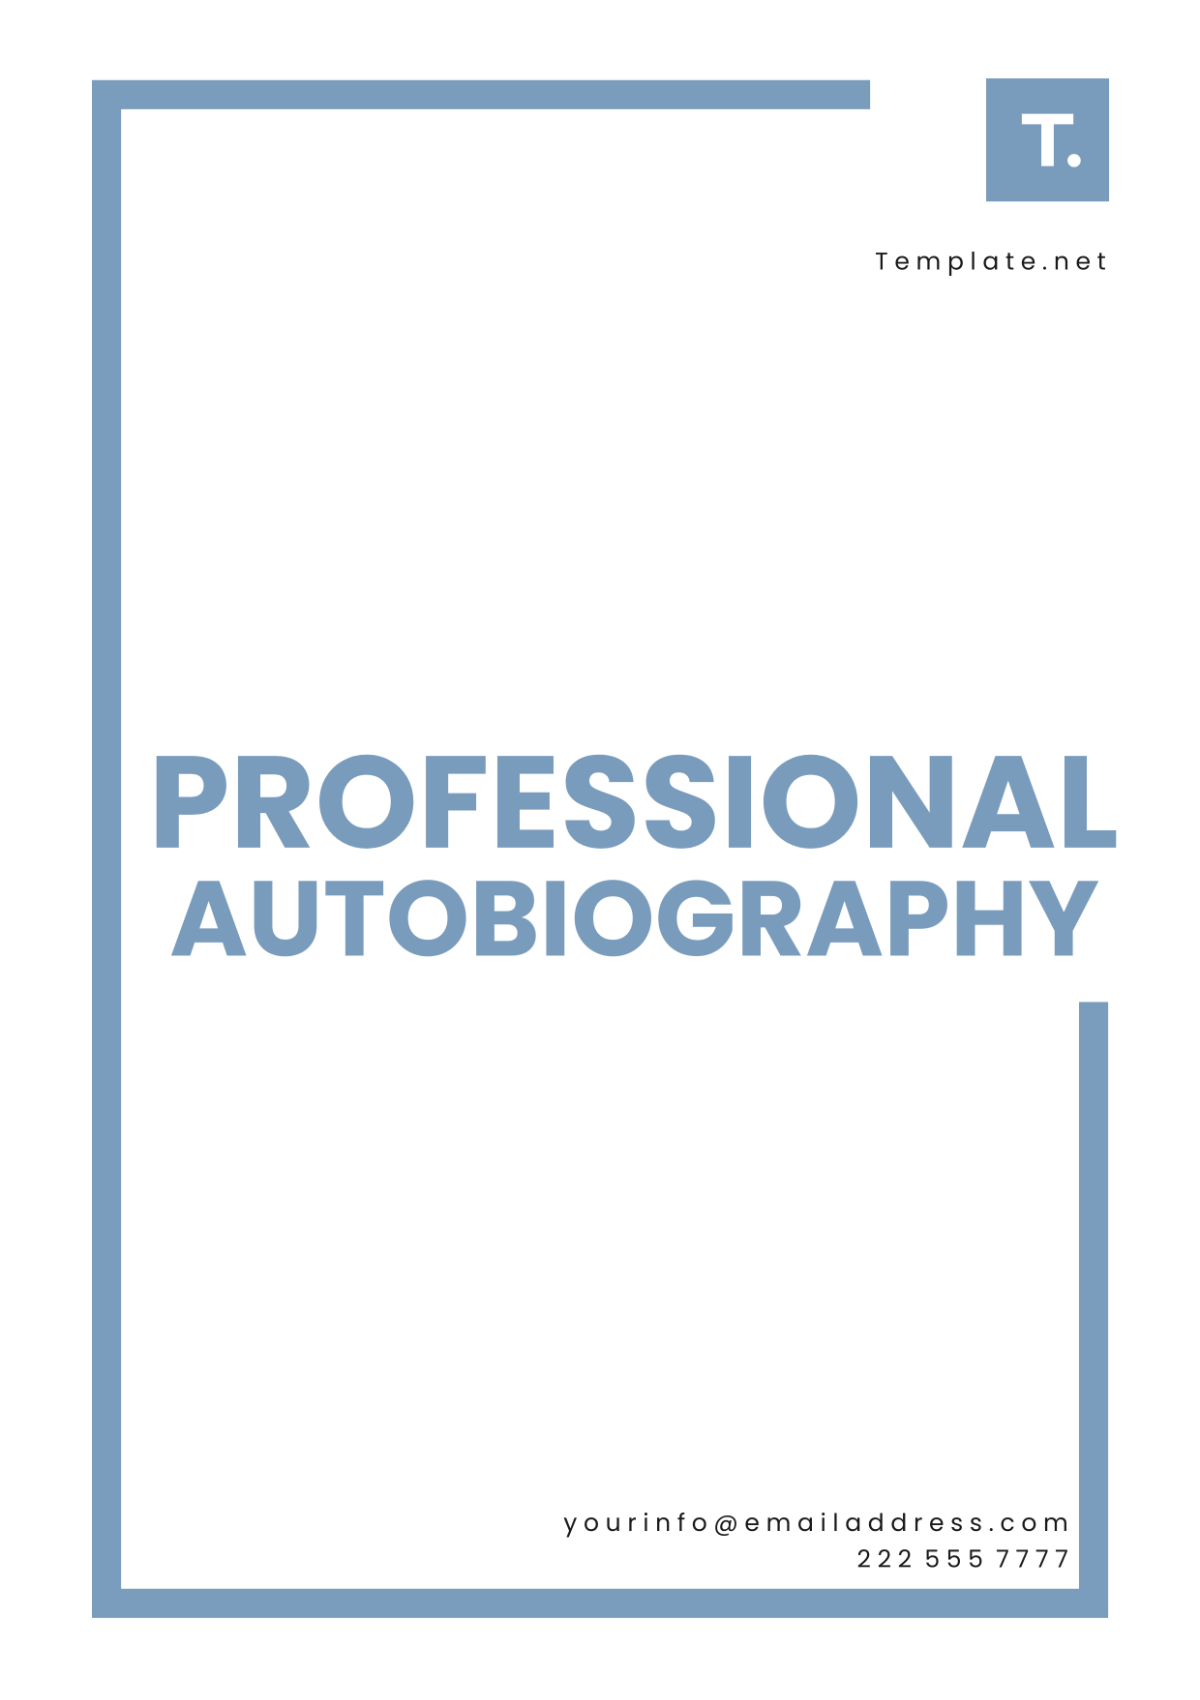 Free Professional Autobiography Template